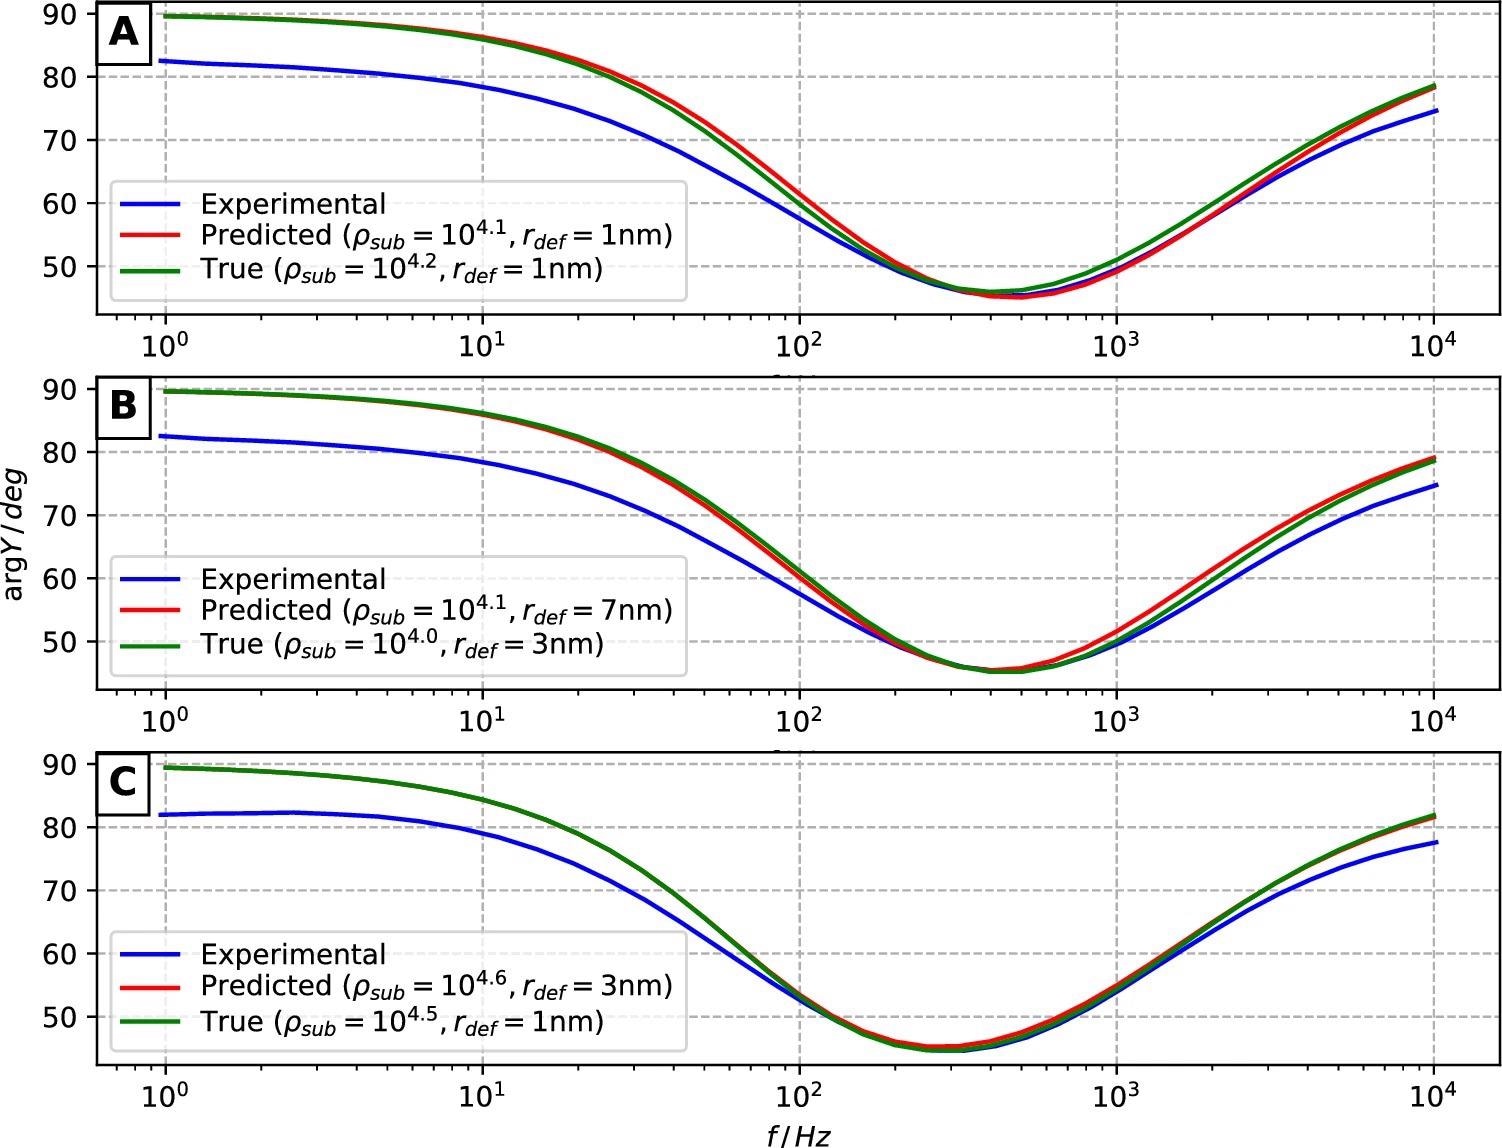 Admittance phase data of experimental EIS measurements (blue curves) versus modeled cases (green and red curves corresponding to manually annotated defect coordinates and CNN model predictions, respectively). (A–C) correspond to AFM surfaces 1, 2, and 3.